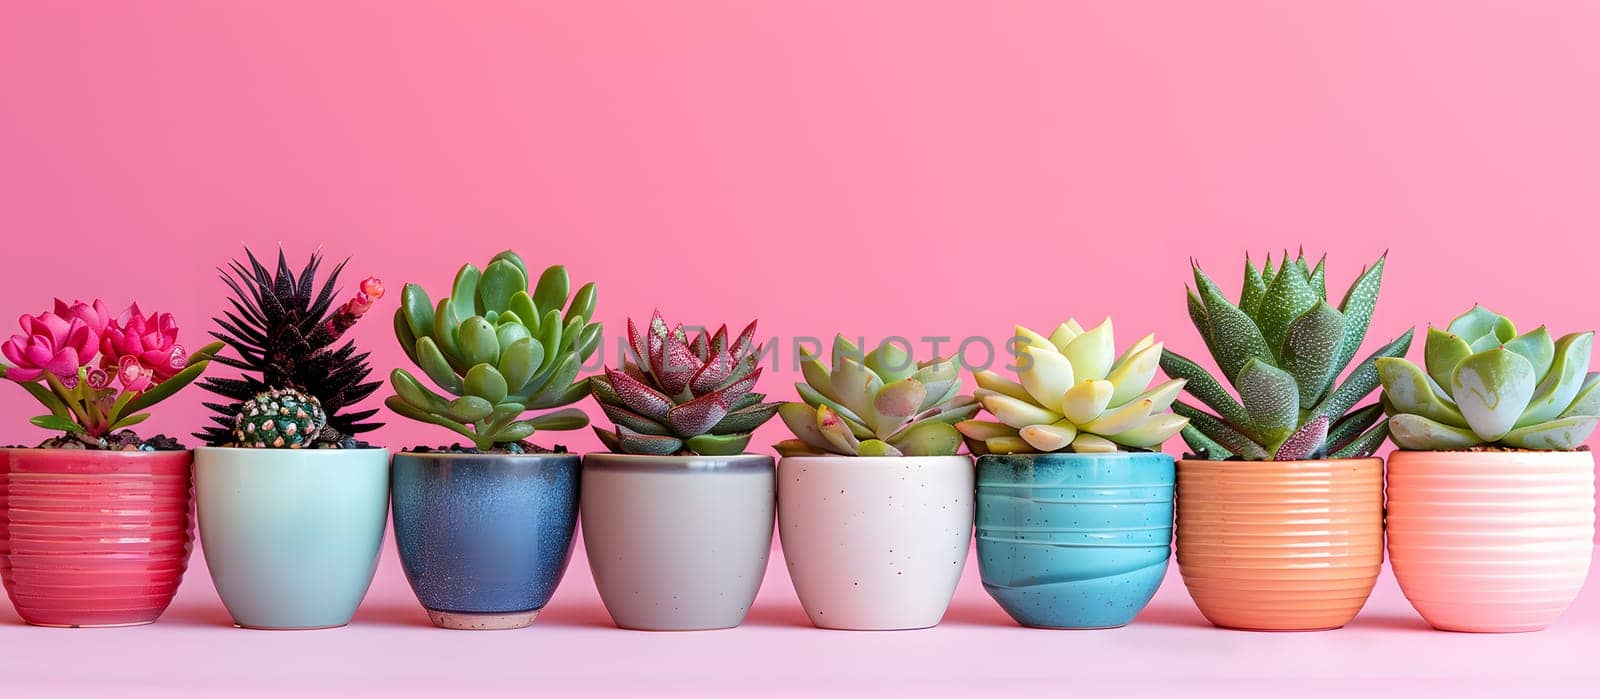 Colorful potted succulents on pink background, perfect houseplant decor by Nadtochiy